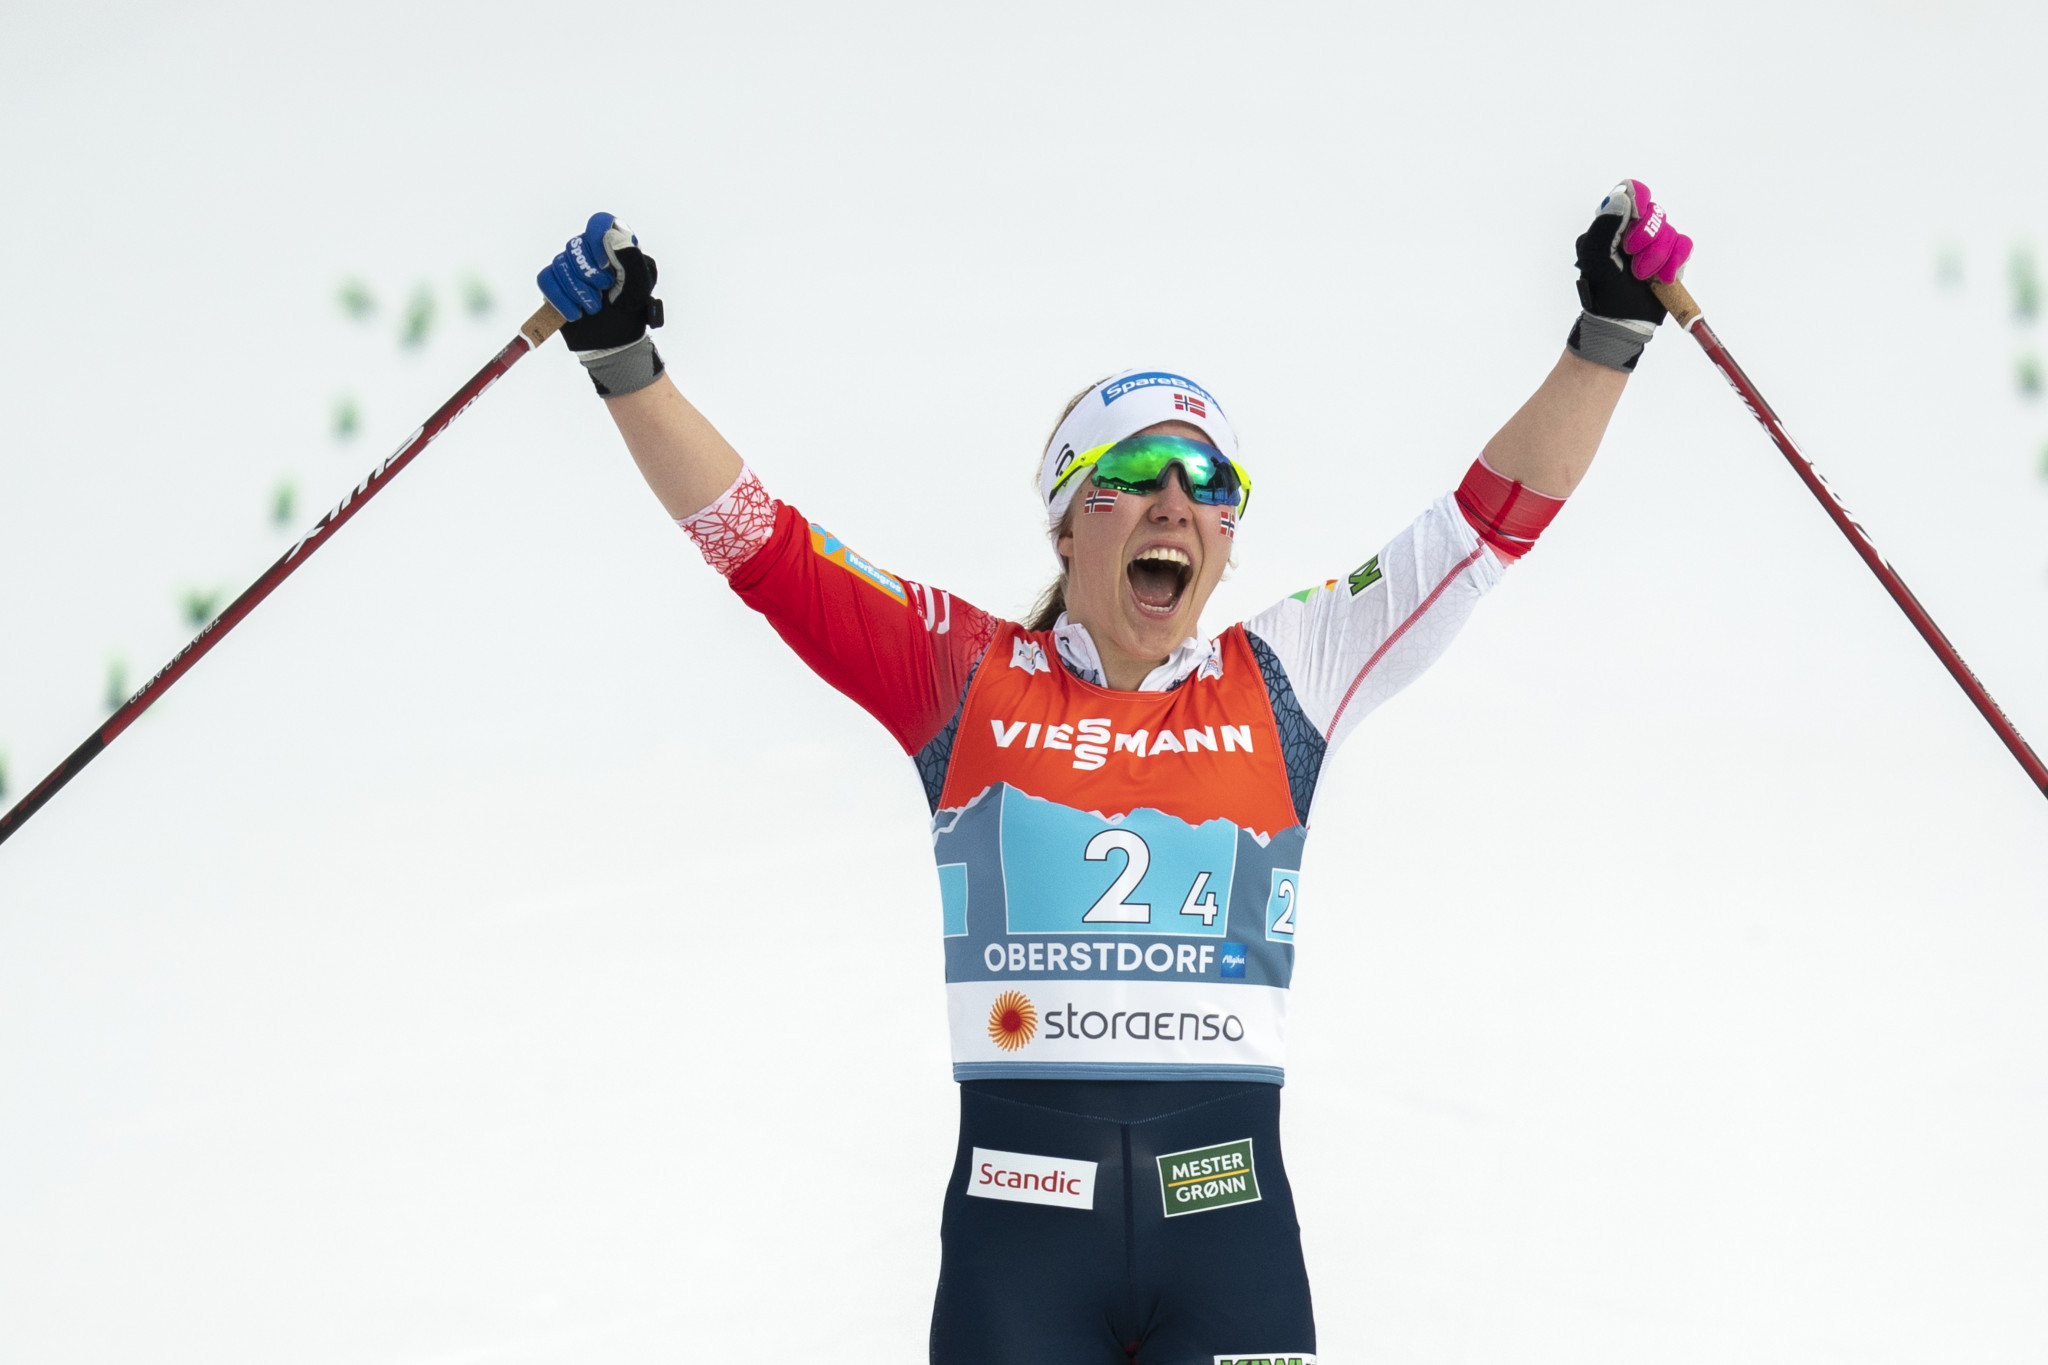 Helene Marie Fossesholm, 19, pictured winning gold at this year's FIS Nordic Ski World Championships, has been named in the senior Norwegian team for 2021-2022 ©Getty Images